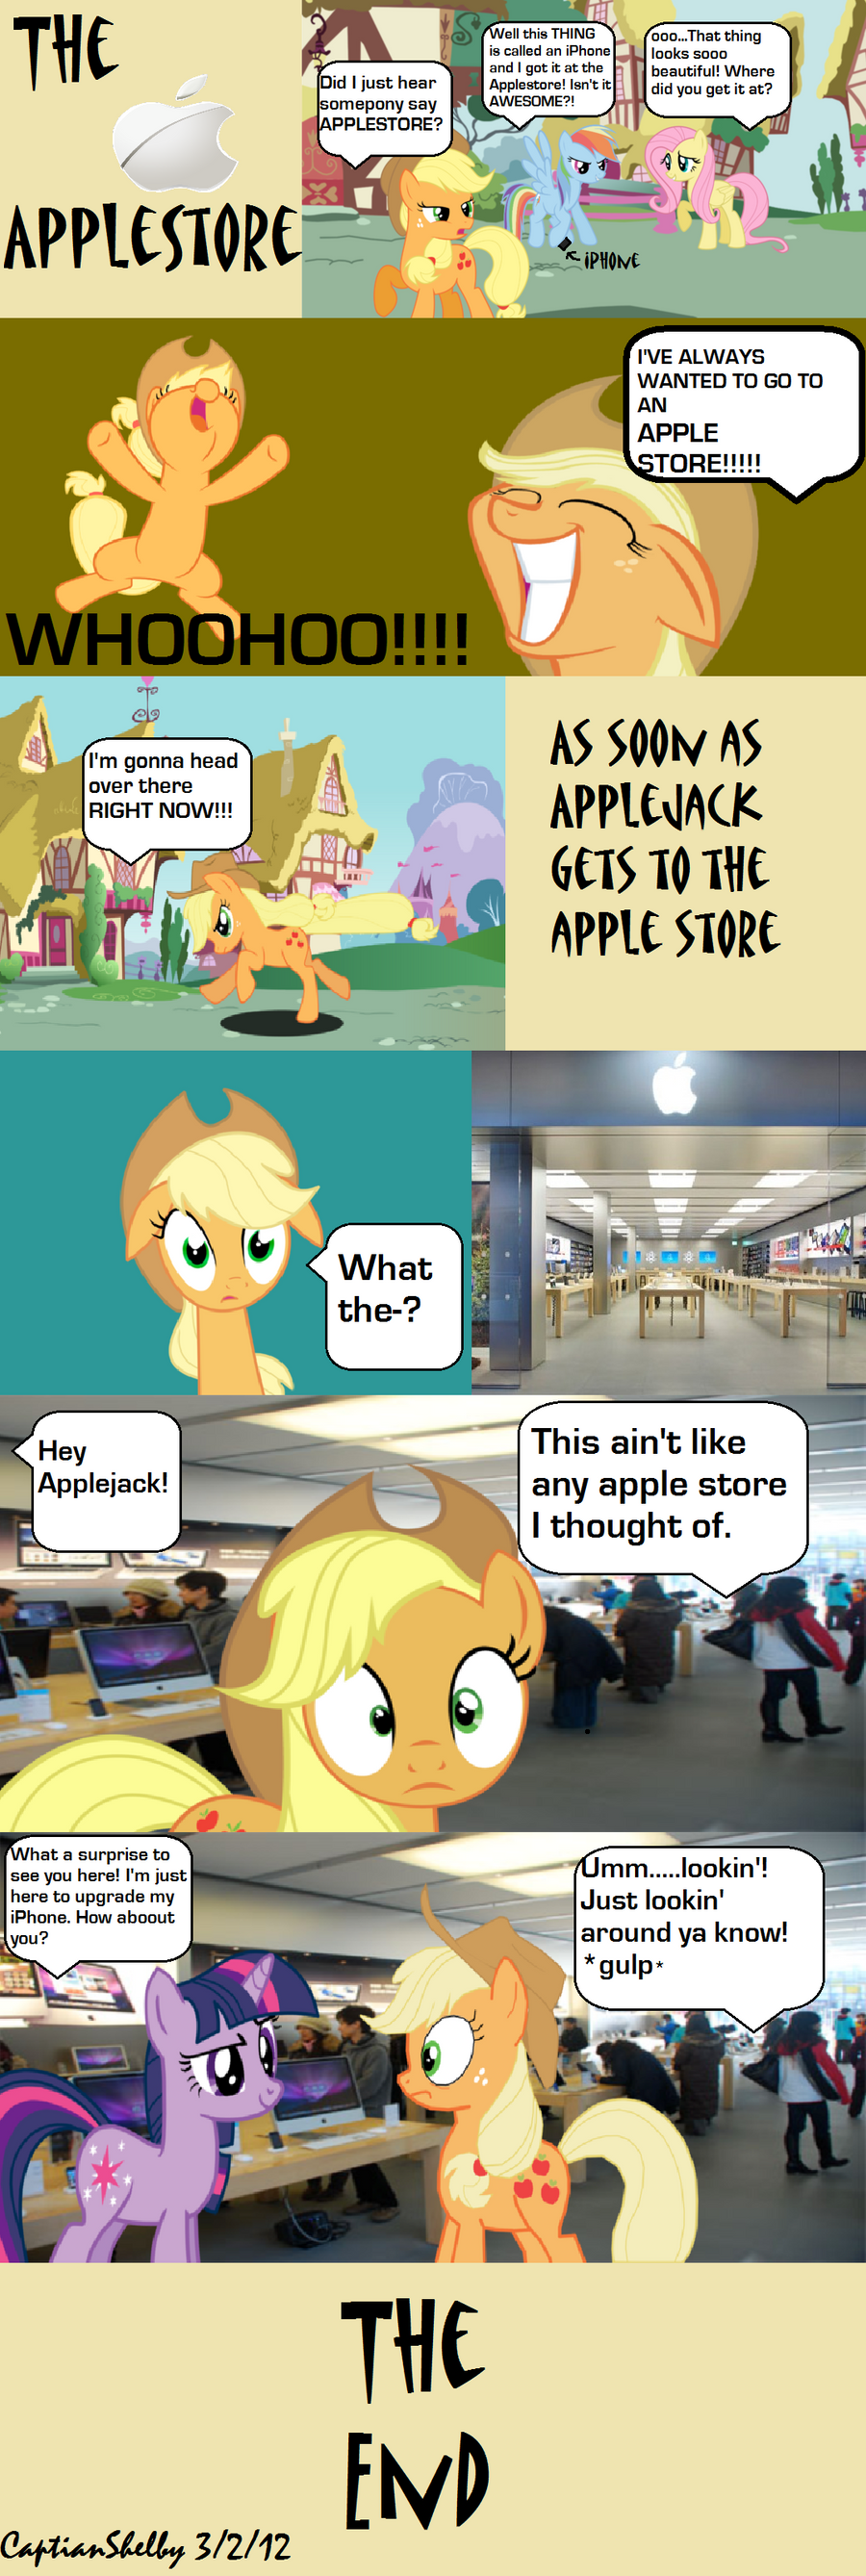 applejack_goes_to_the_apple_store_by_captianshelby-d4rmypk.png